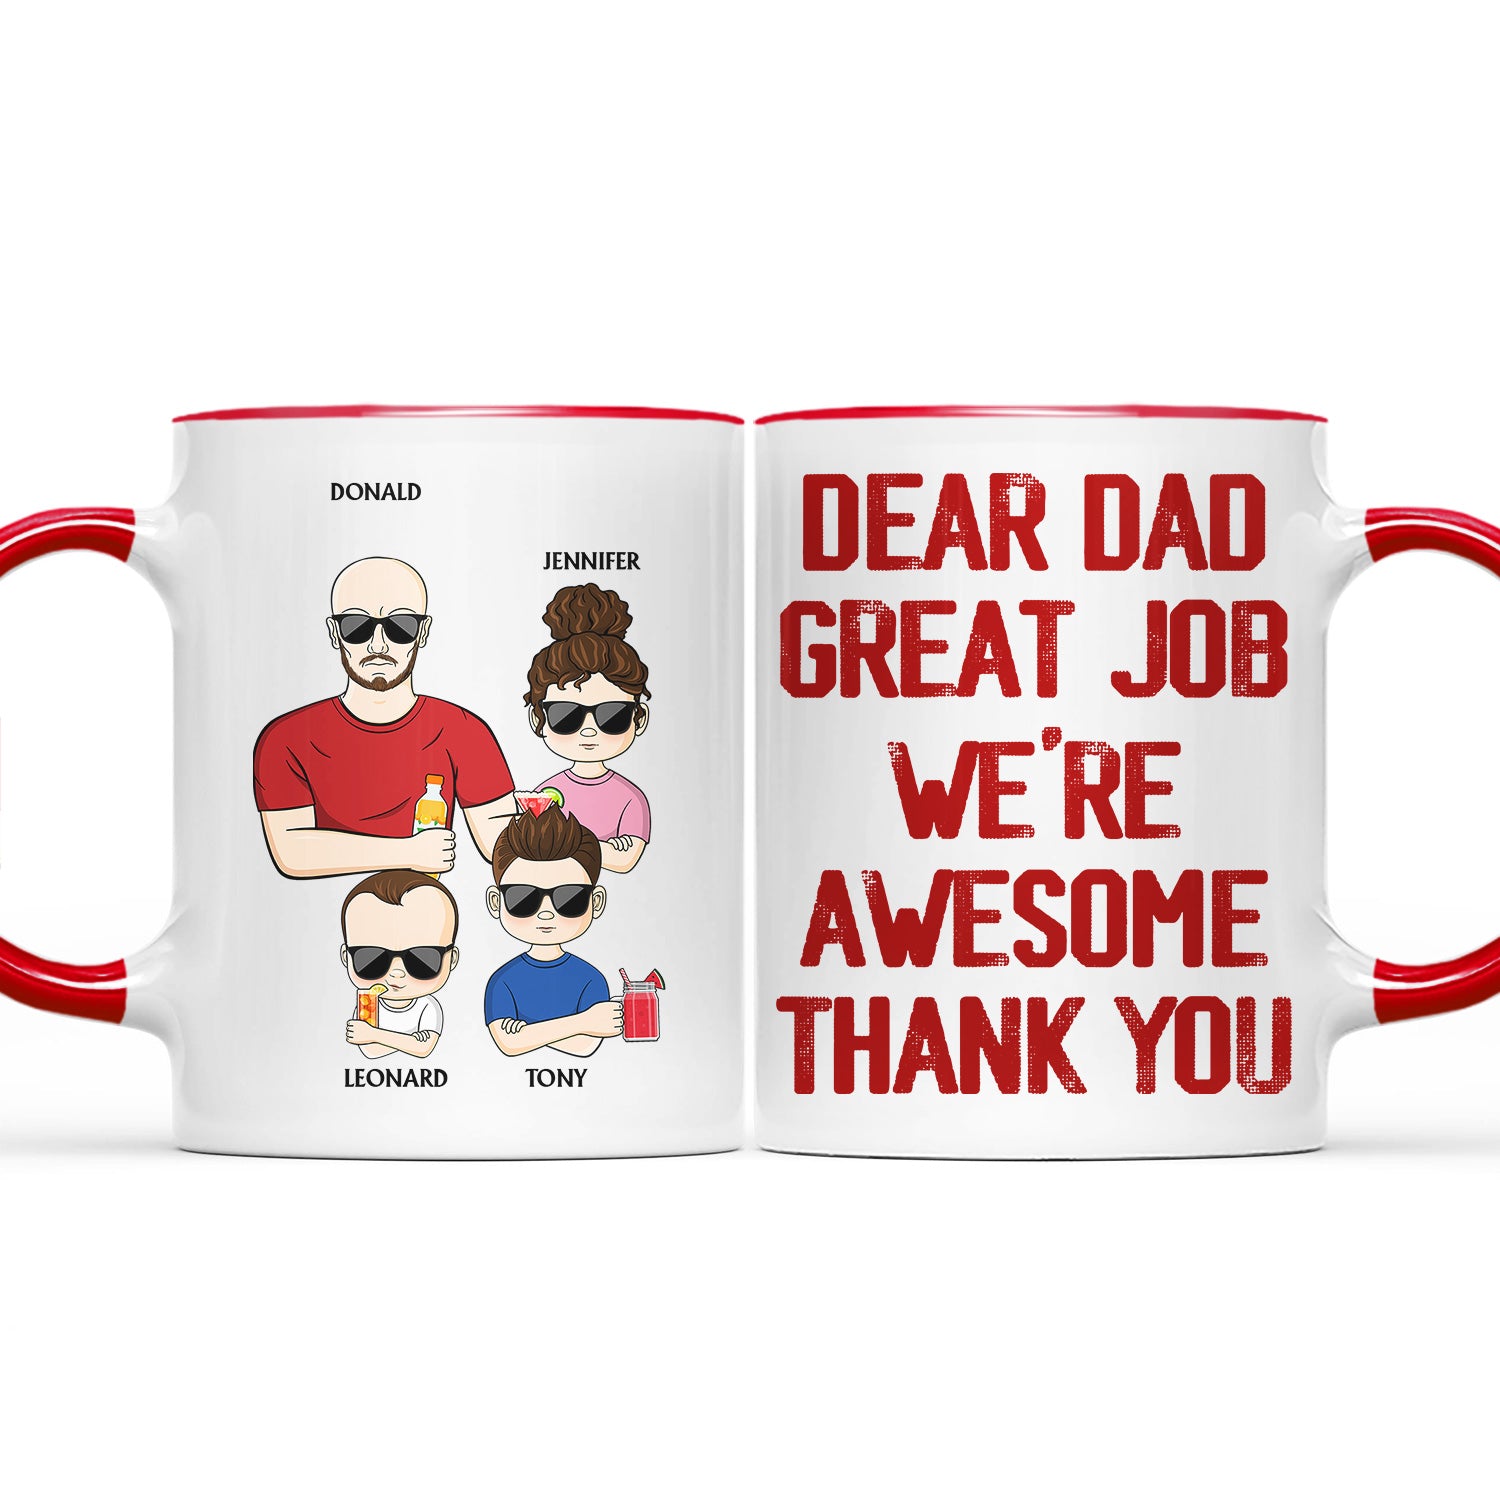 Dear Dad Great Job I'm Awesome Thank You Young - Birthday, Loving Gift For Dad, Father, Grandpa, Grandfather - Personalized Custom Accent Mug